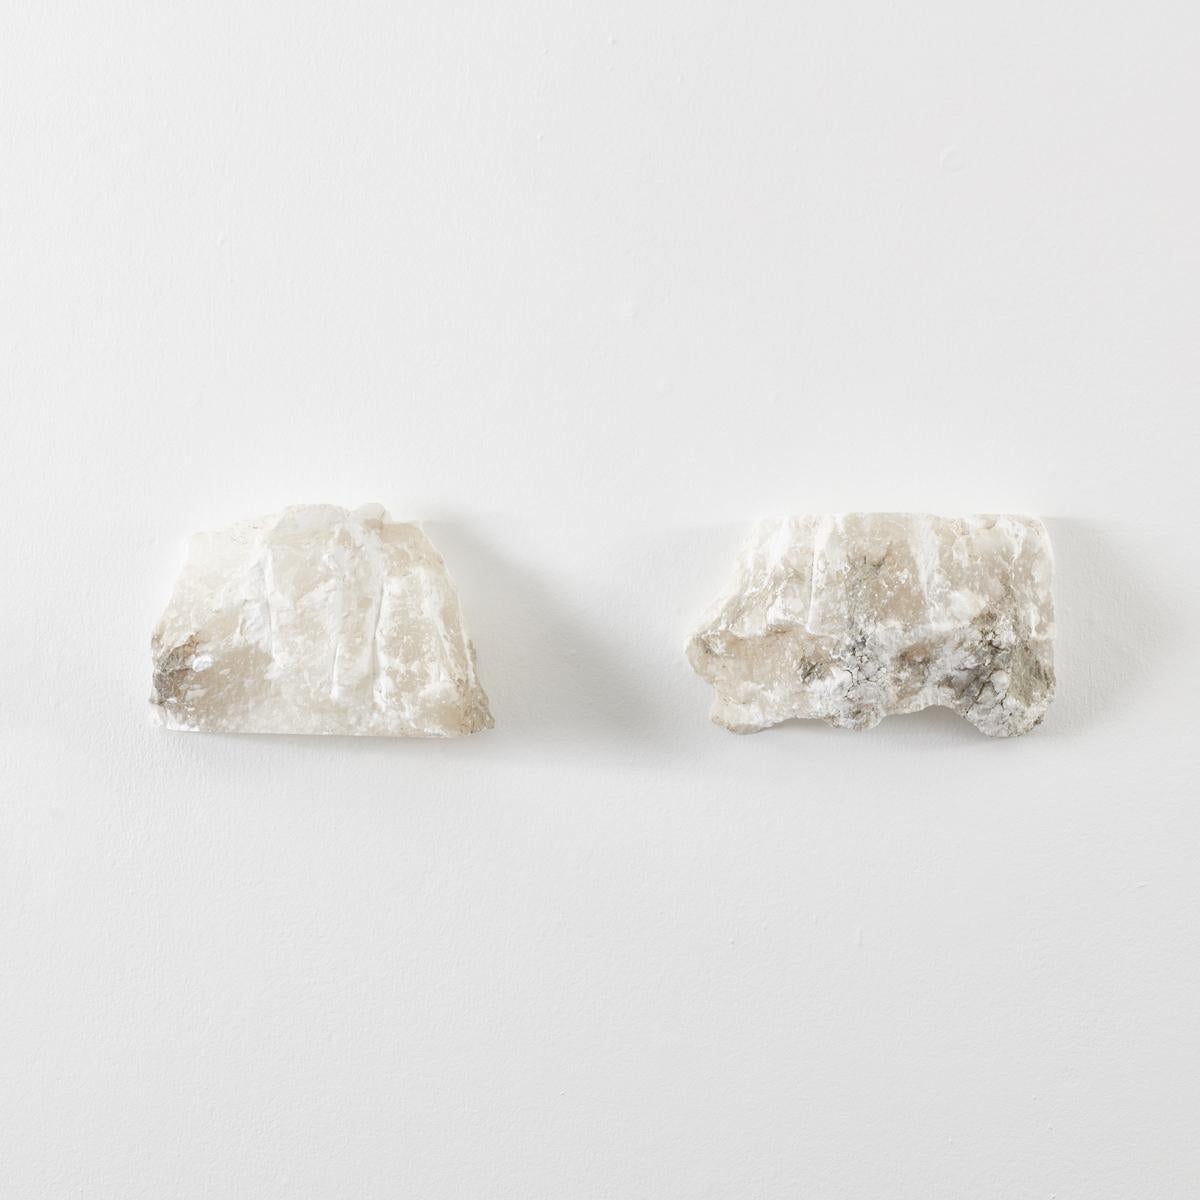 This pair of large rough-hewn alabaster wall sconces have a great presence to them. They are made from thick pieces of alabaster stone with rough-cut edges and chisel marks. Alabaster is known for its ethereal translucence, allowing light to glow